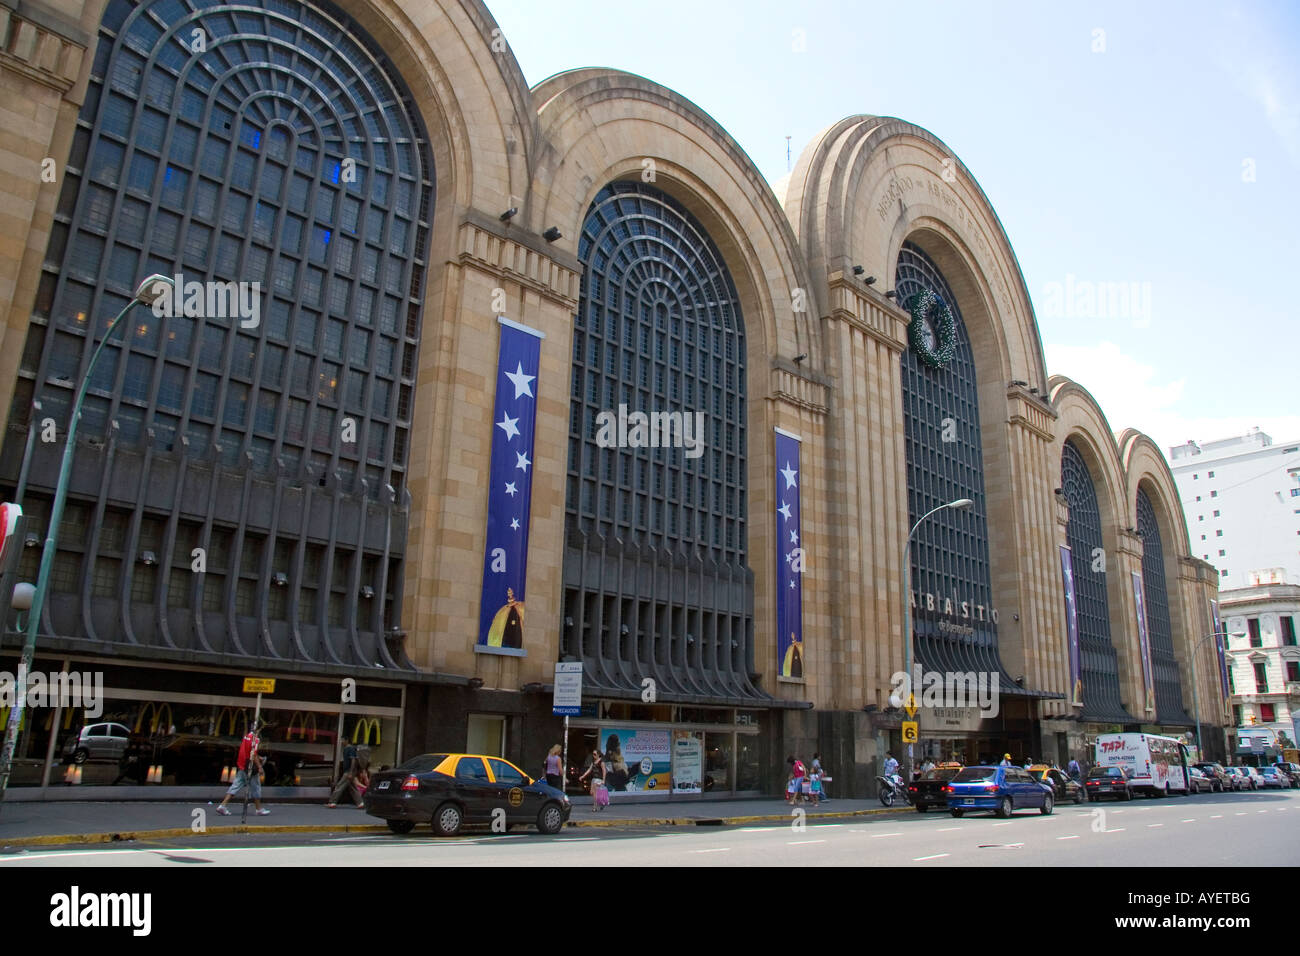 Exterior of the Abasto Shopping Centre in Buenos Aires Argentina Stock Photo